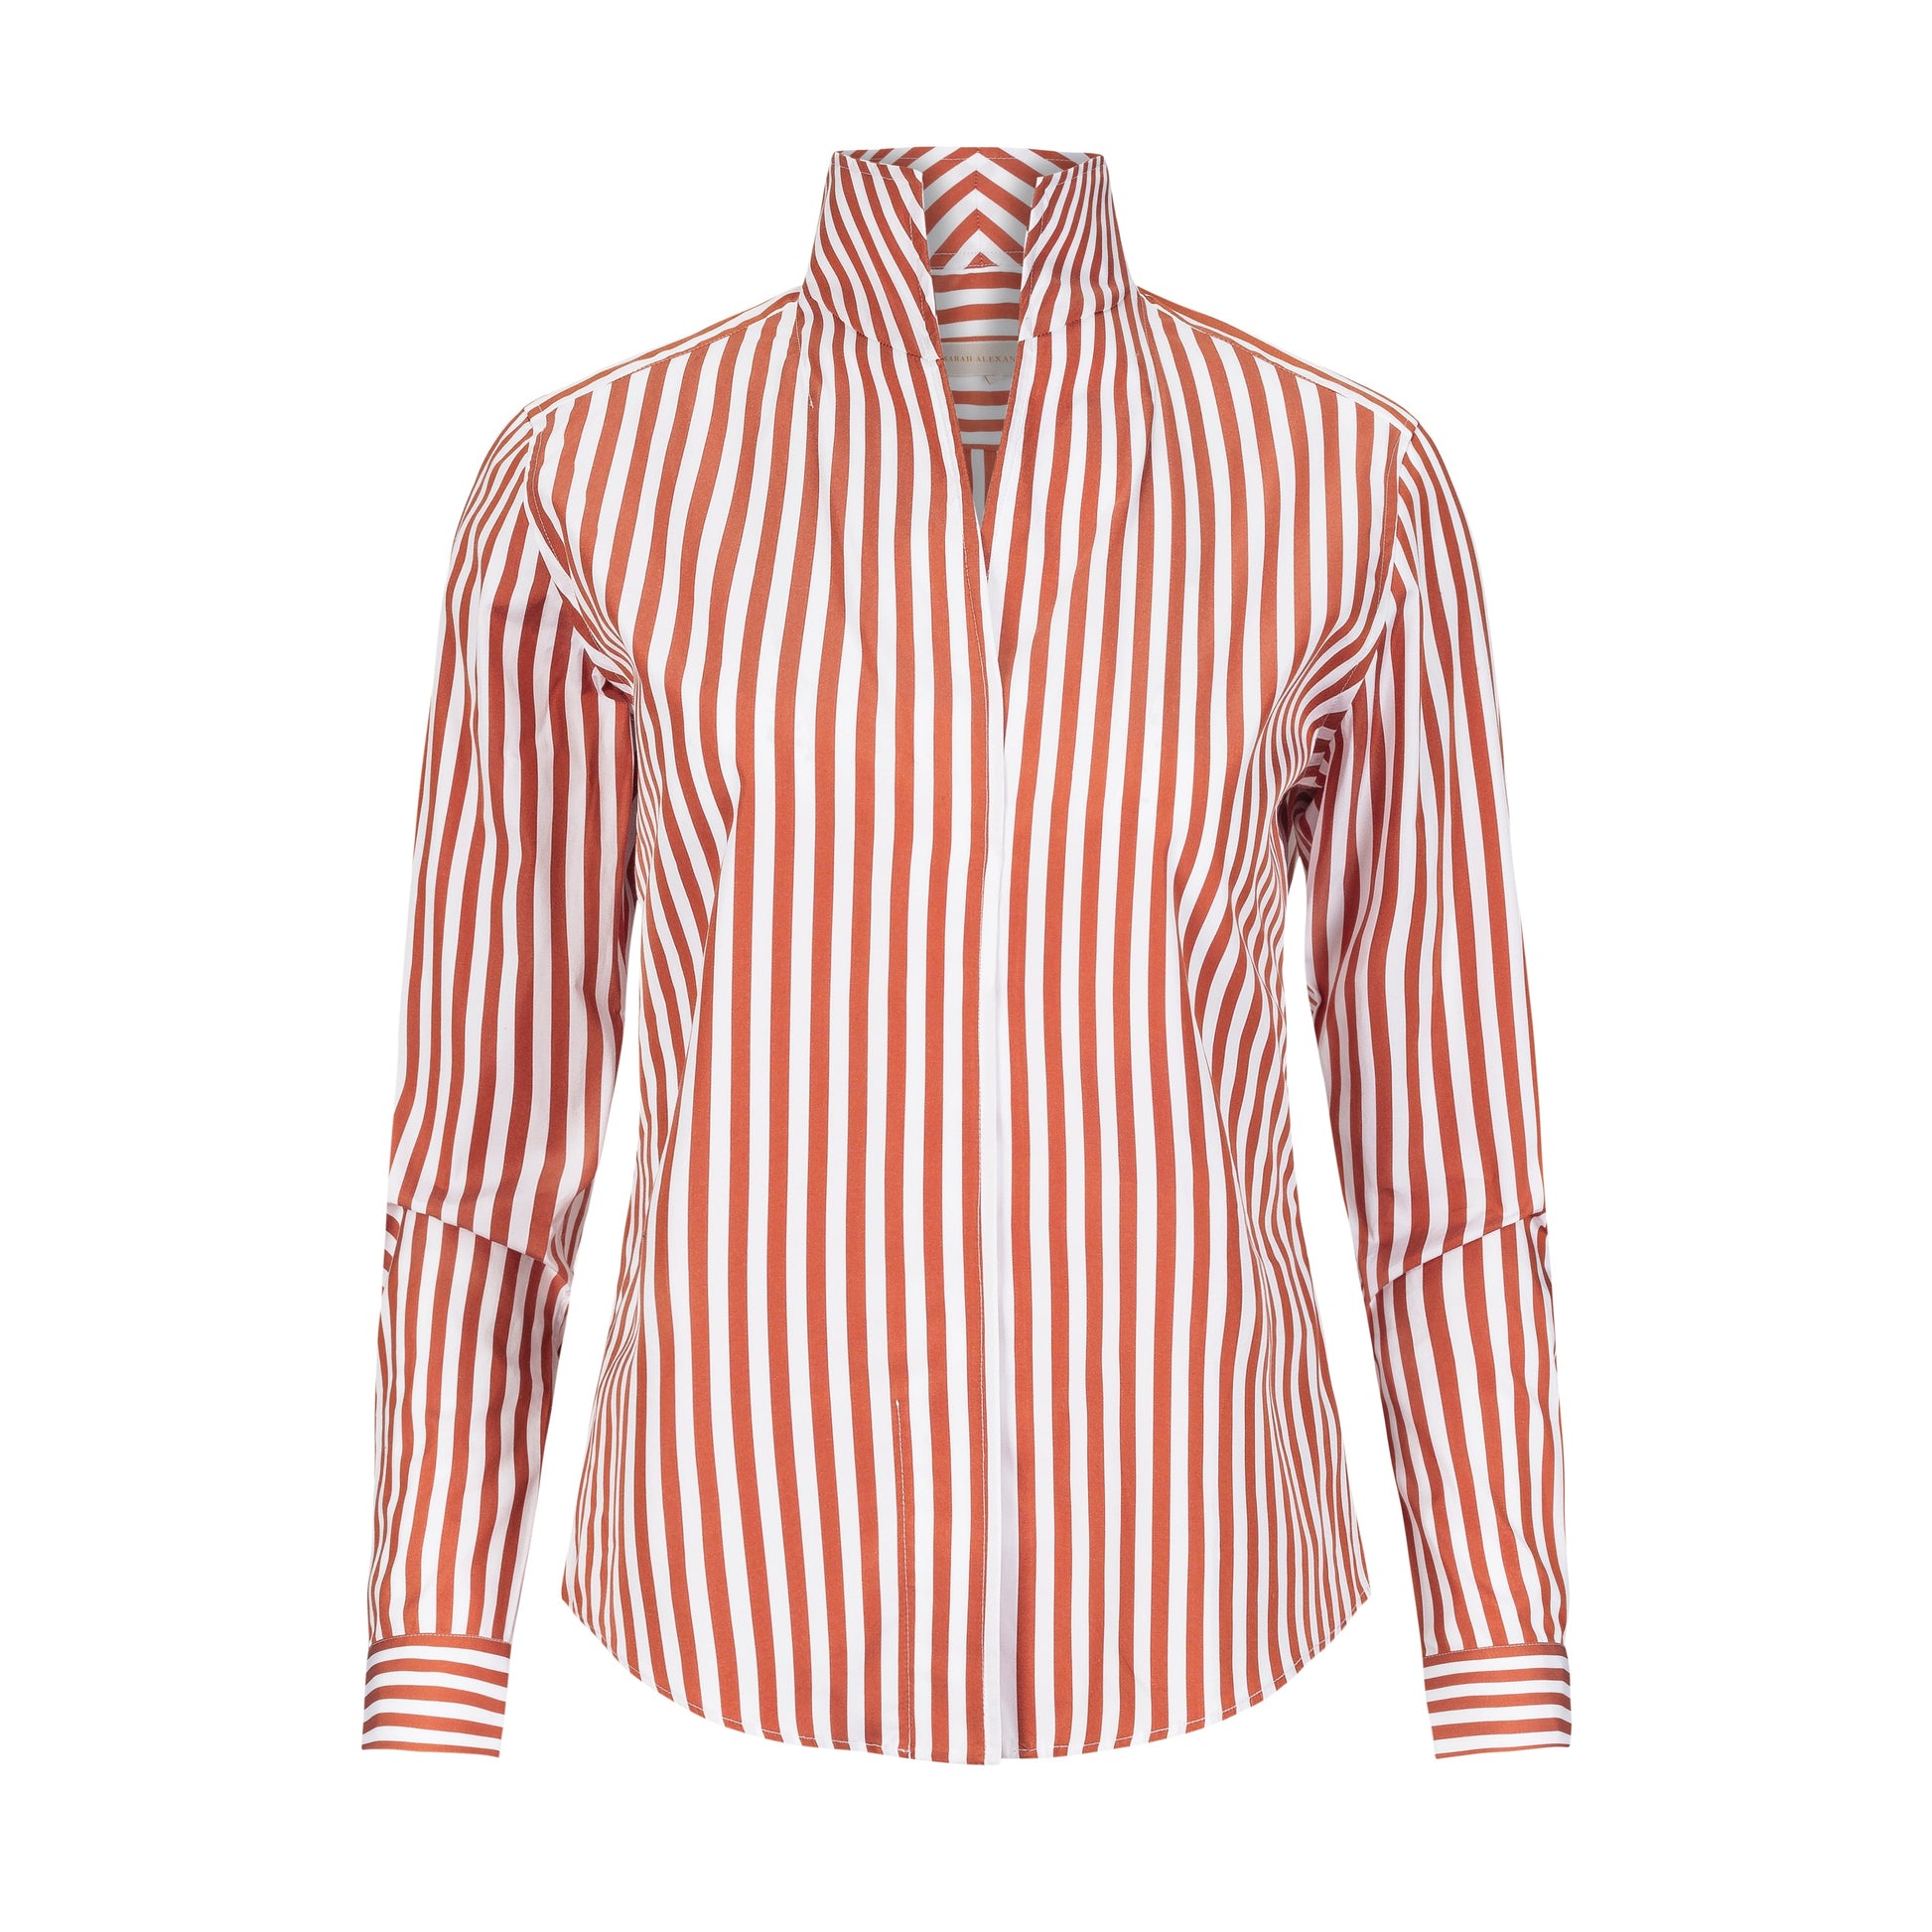 Signature Rust Go With It orange and white striped womens dress shirt